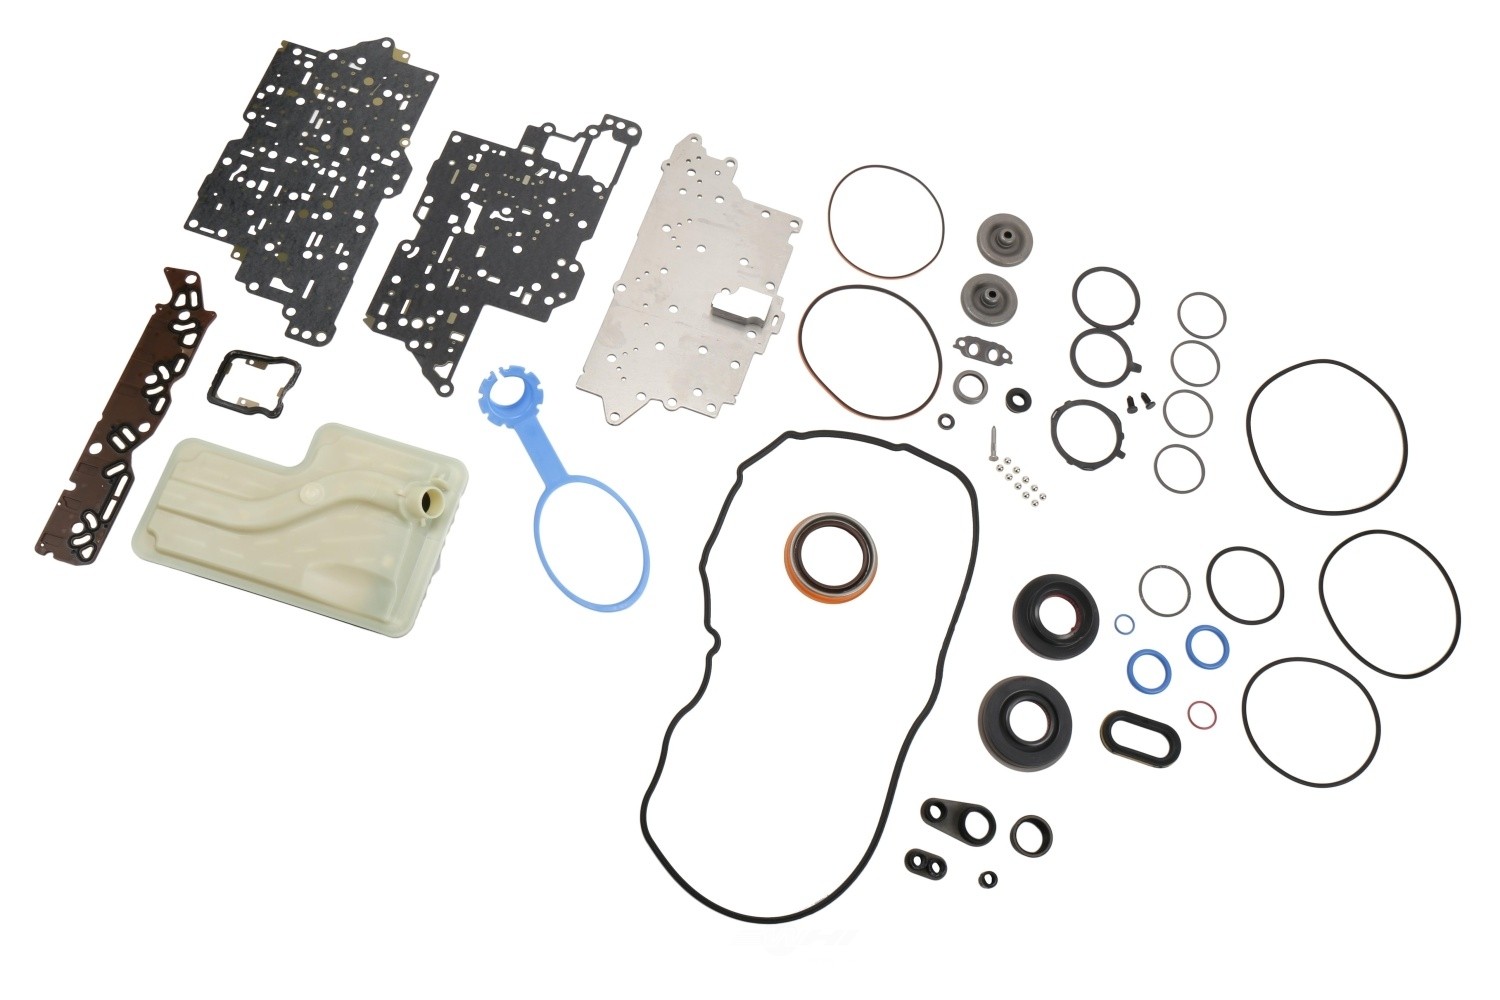 GM GENUINE PARTS - Automatic Transmission Seals and O-Rings Kit - GMP 24276290